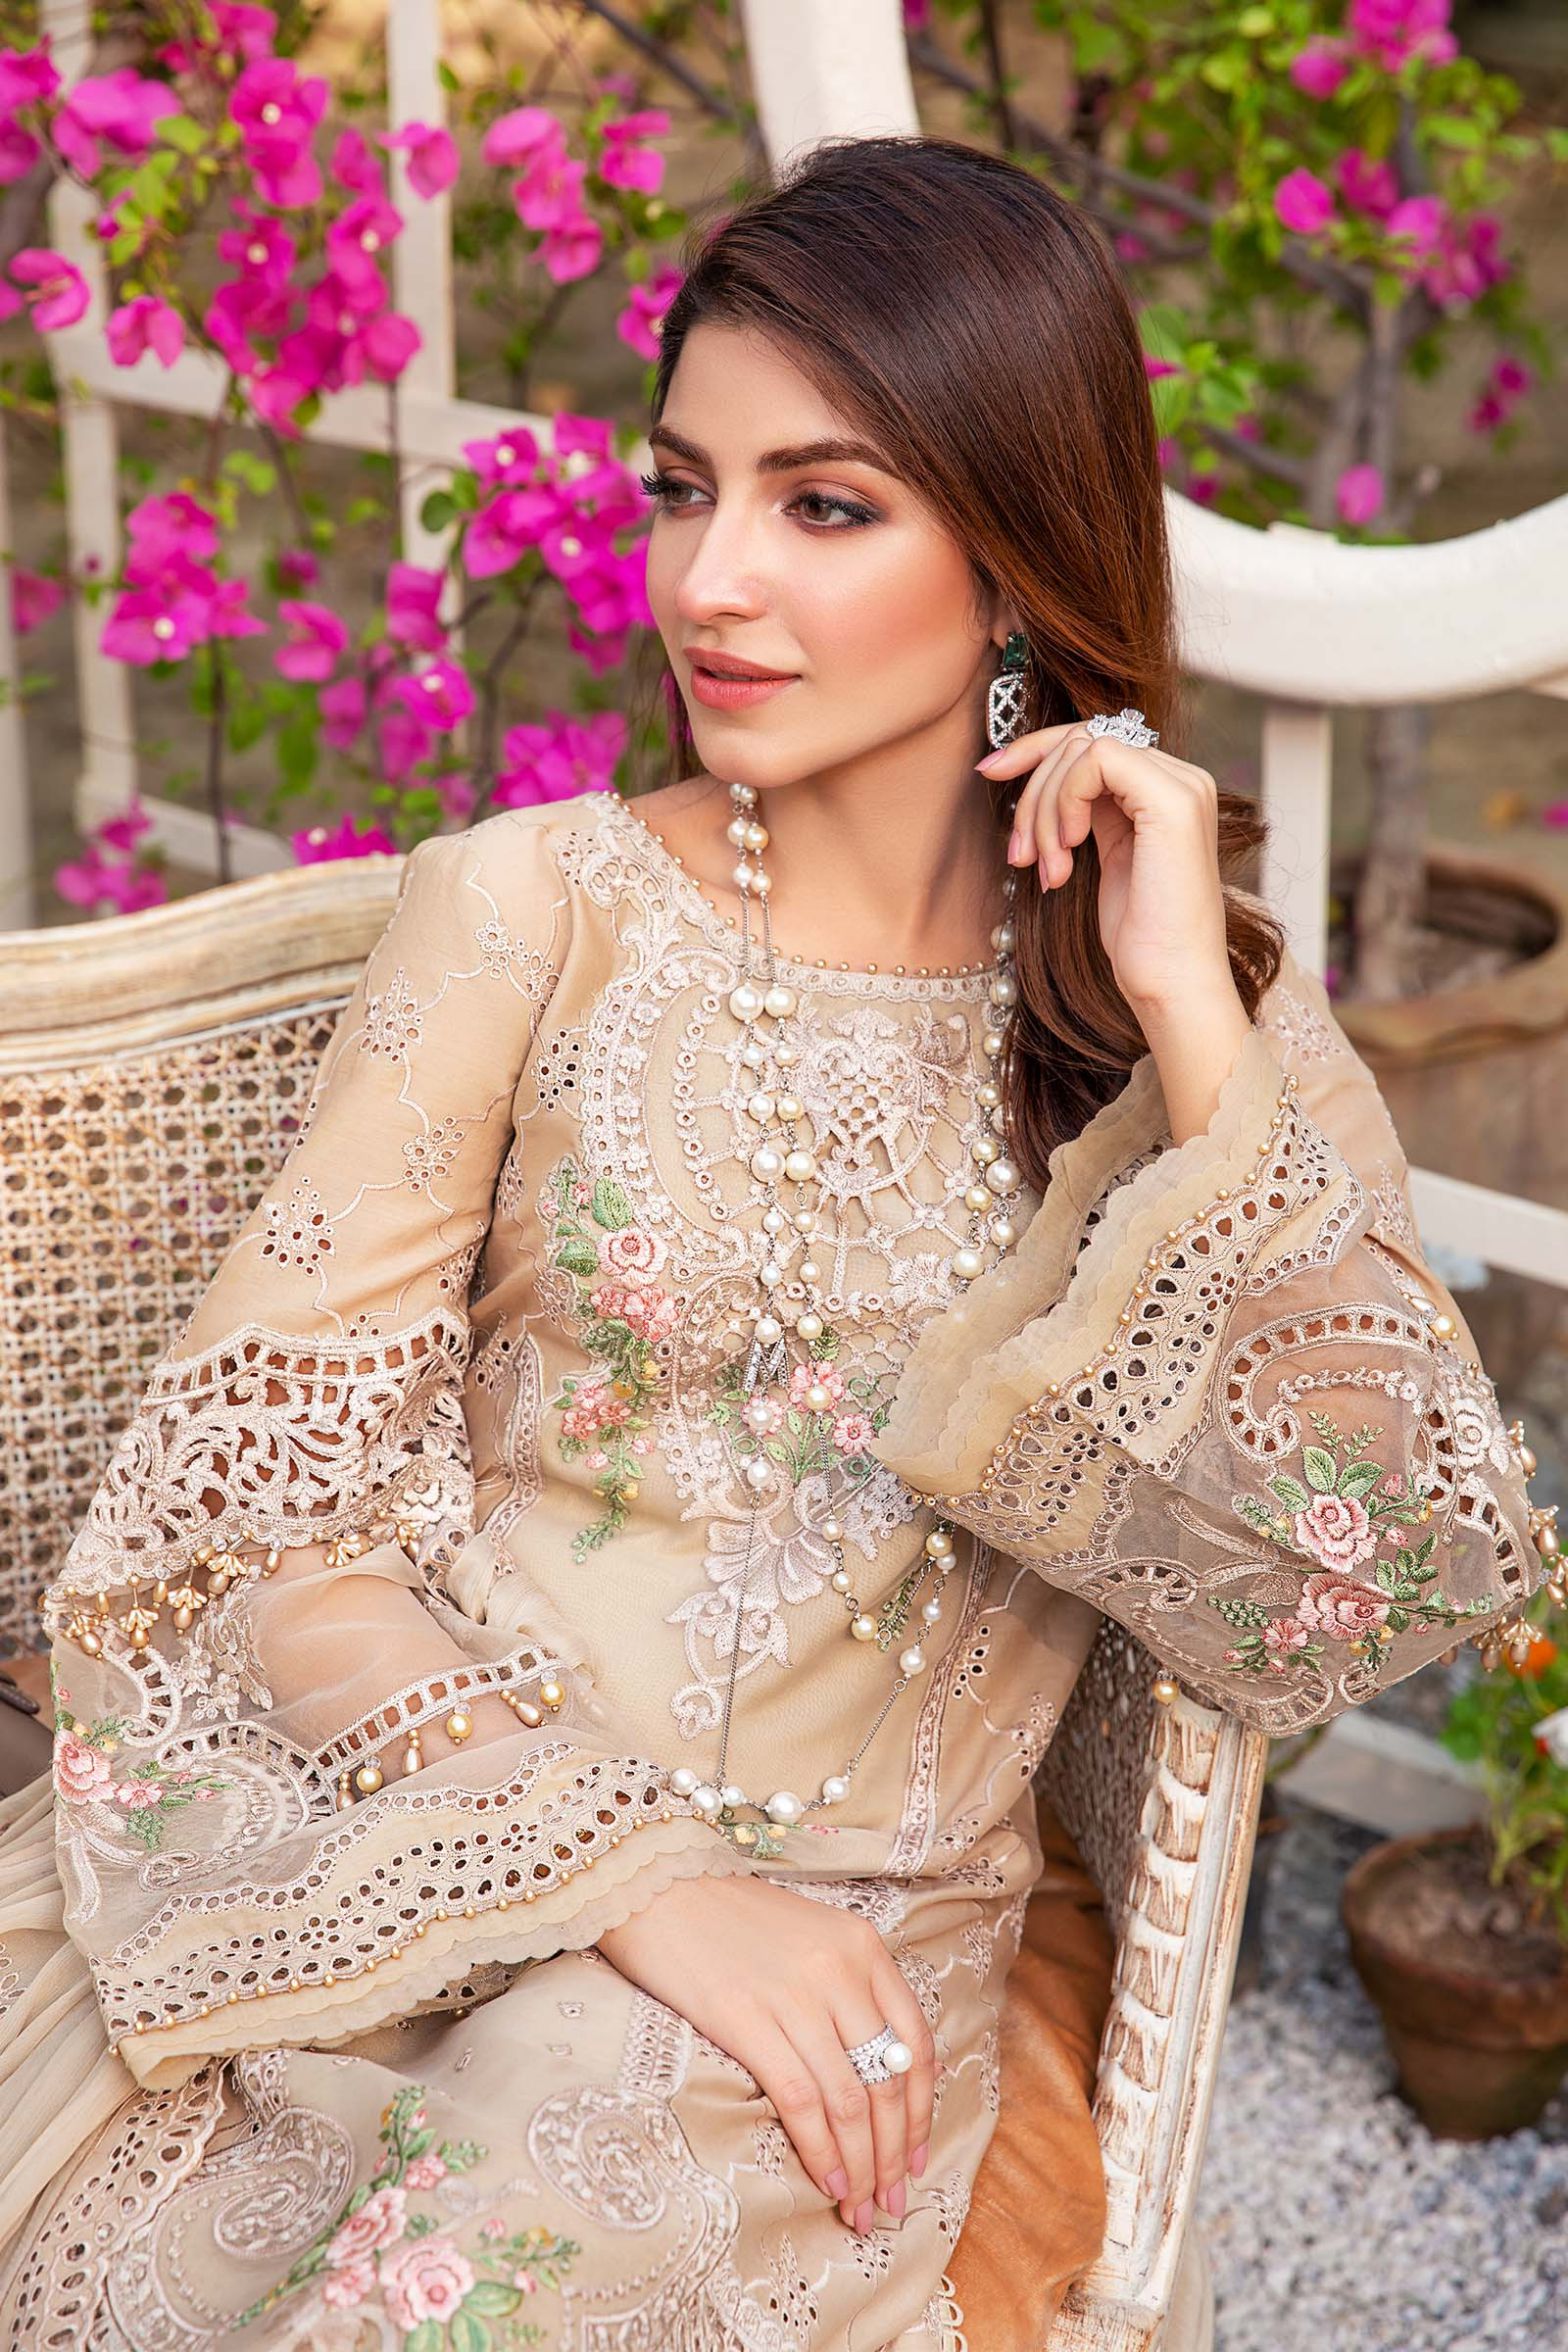 Maria B Lawn pinkEmbroidered Asian Ready Made Pakistani Indian 2019 FOR EID 